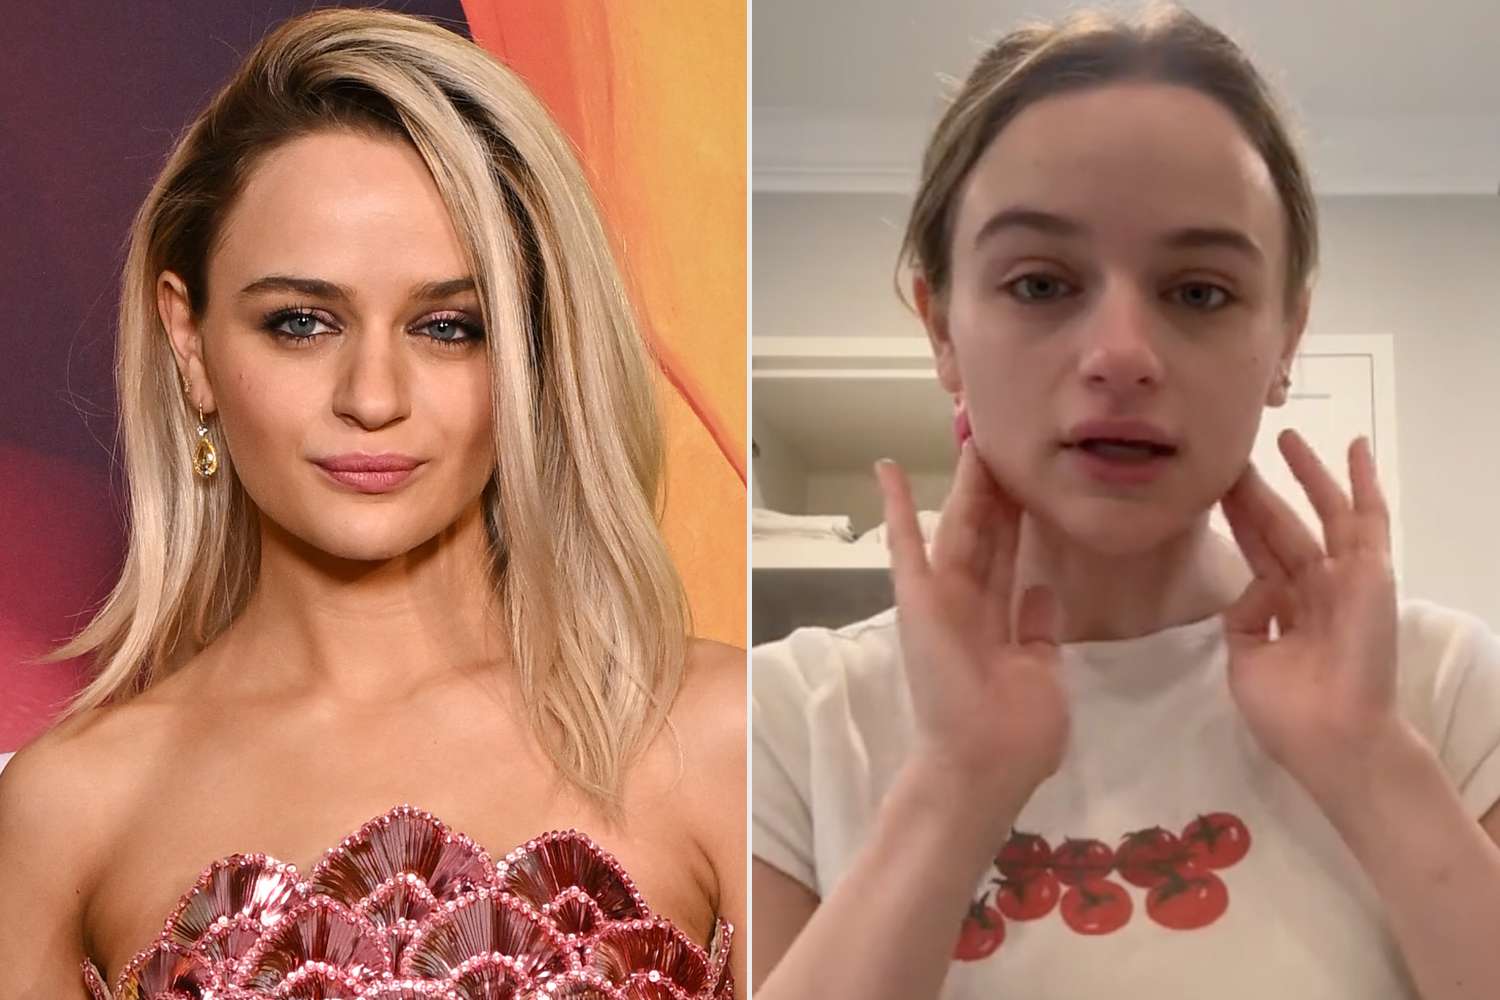 Joey King Says She's Been 'Struggling' with Perioral Dermatitis for 7 Months: 'No Idea What to Do'